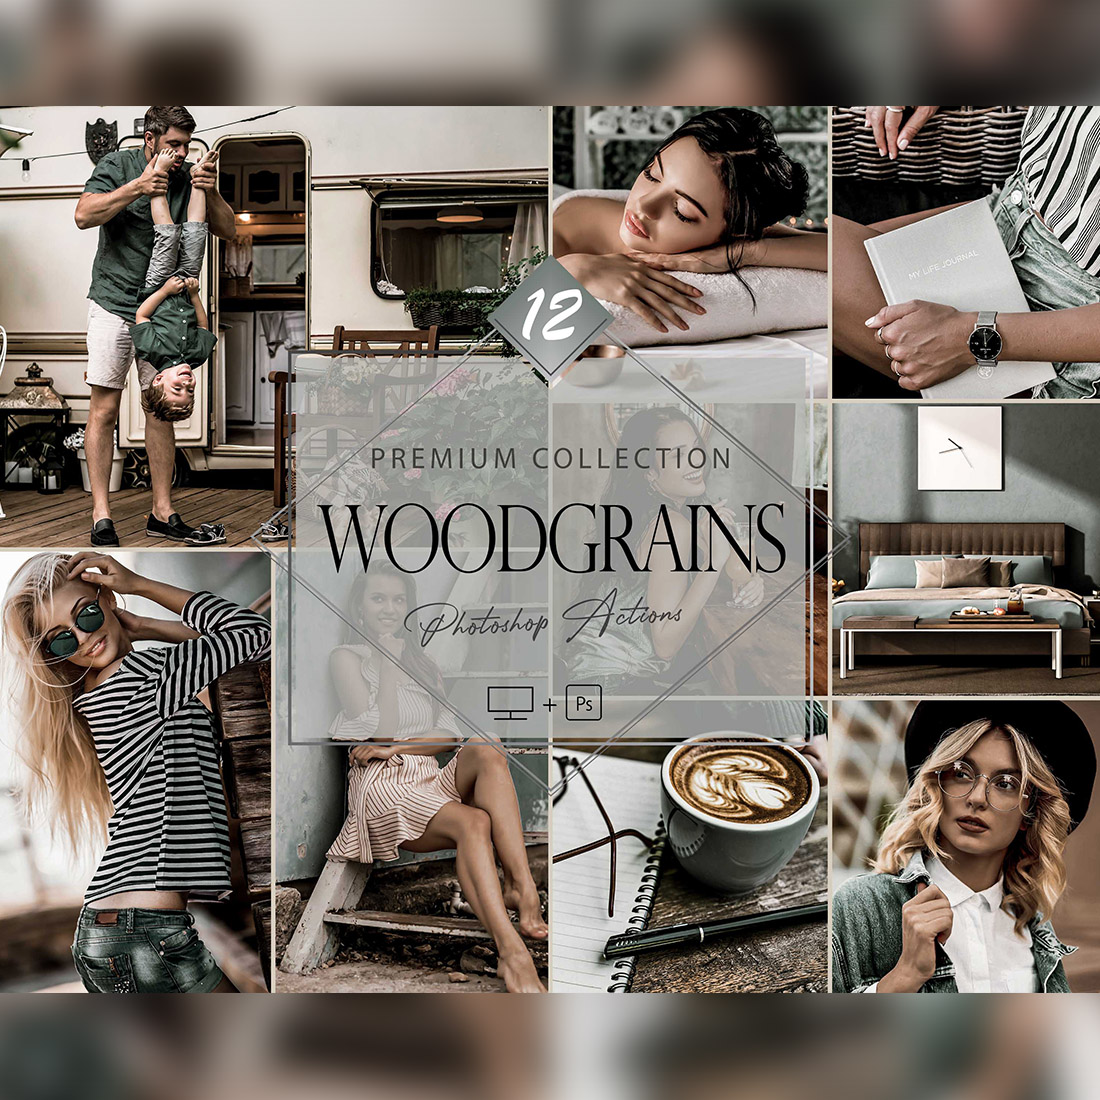 12 Photoshop Actions, Woodgrains Ps Action, Green ACR Preset, Brown Filter, Lifestyle Theme For Instagram, Spring Moody, Warm Portrait cover image.